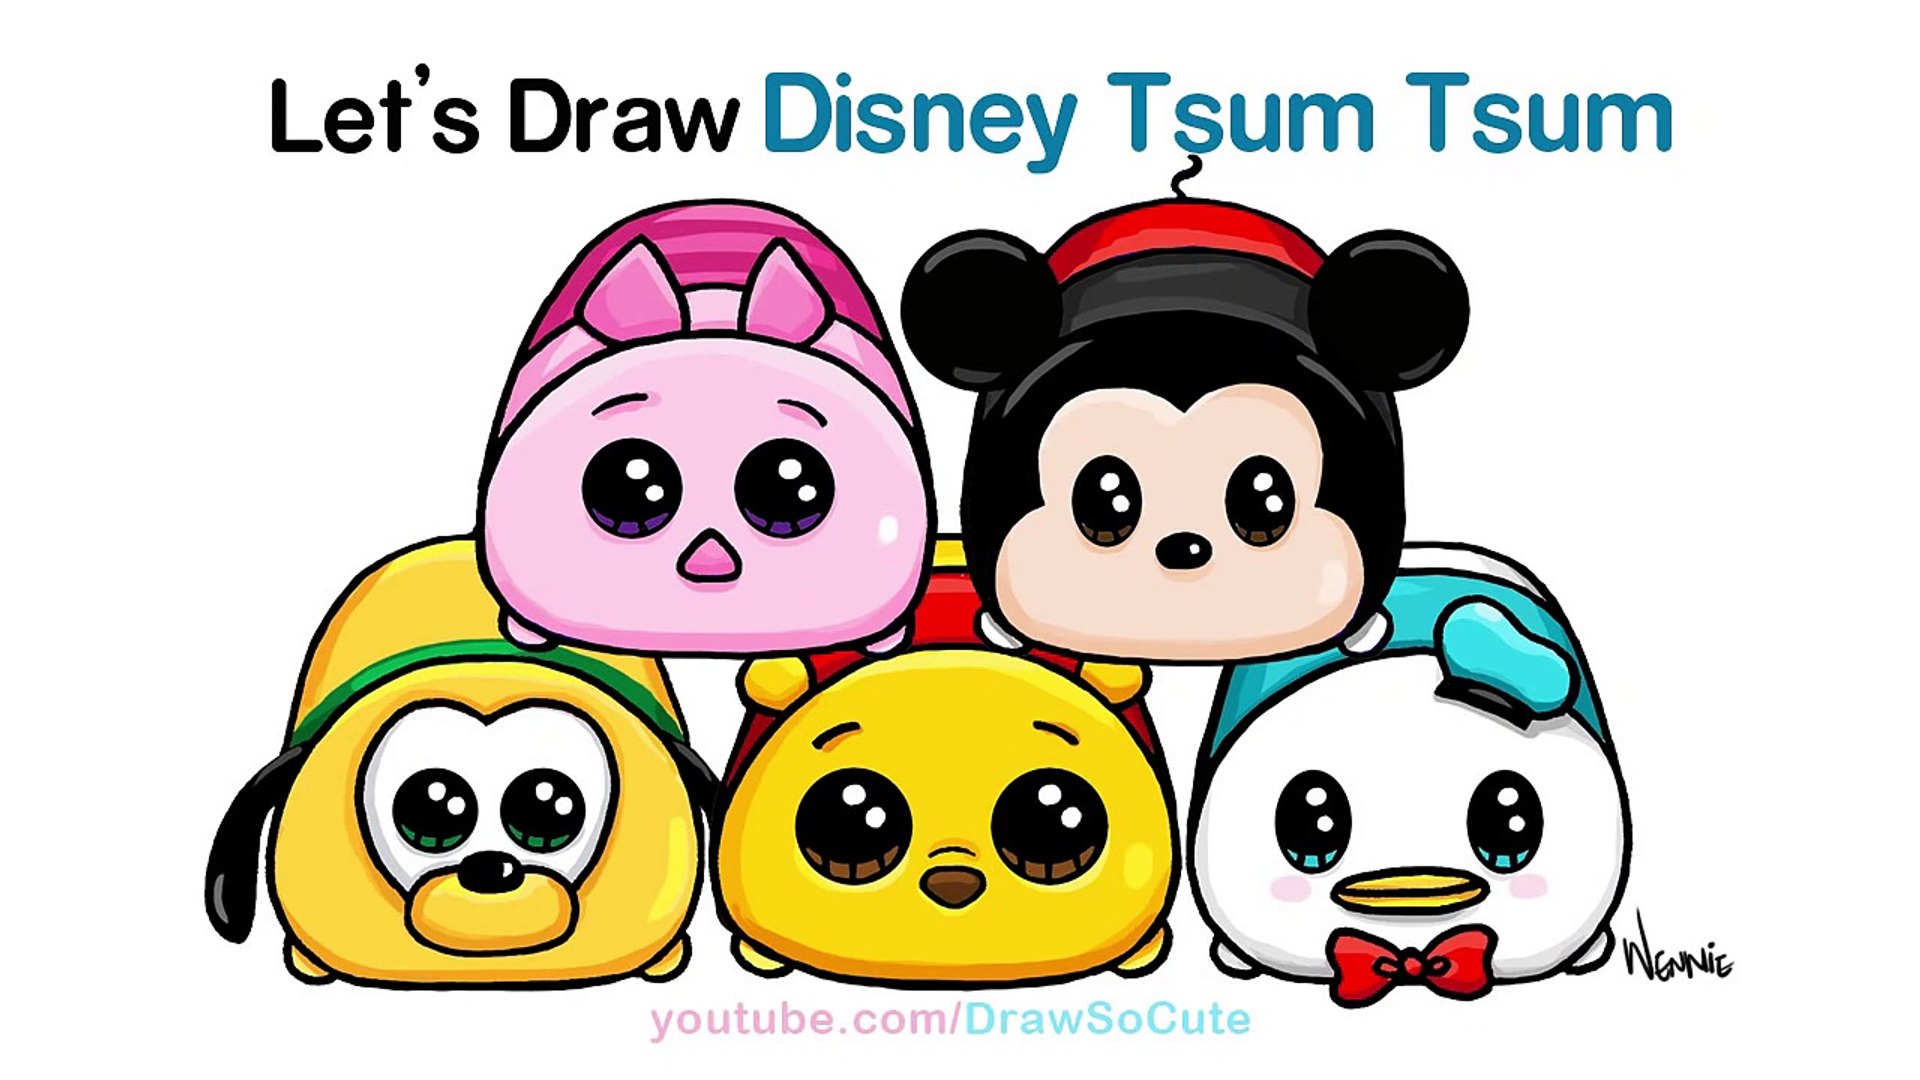 How to Draw Disney Tsum Tsum Cute and Easy step by step - video Dailymotion